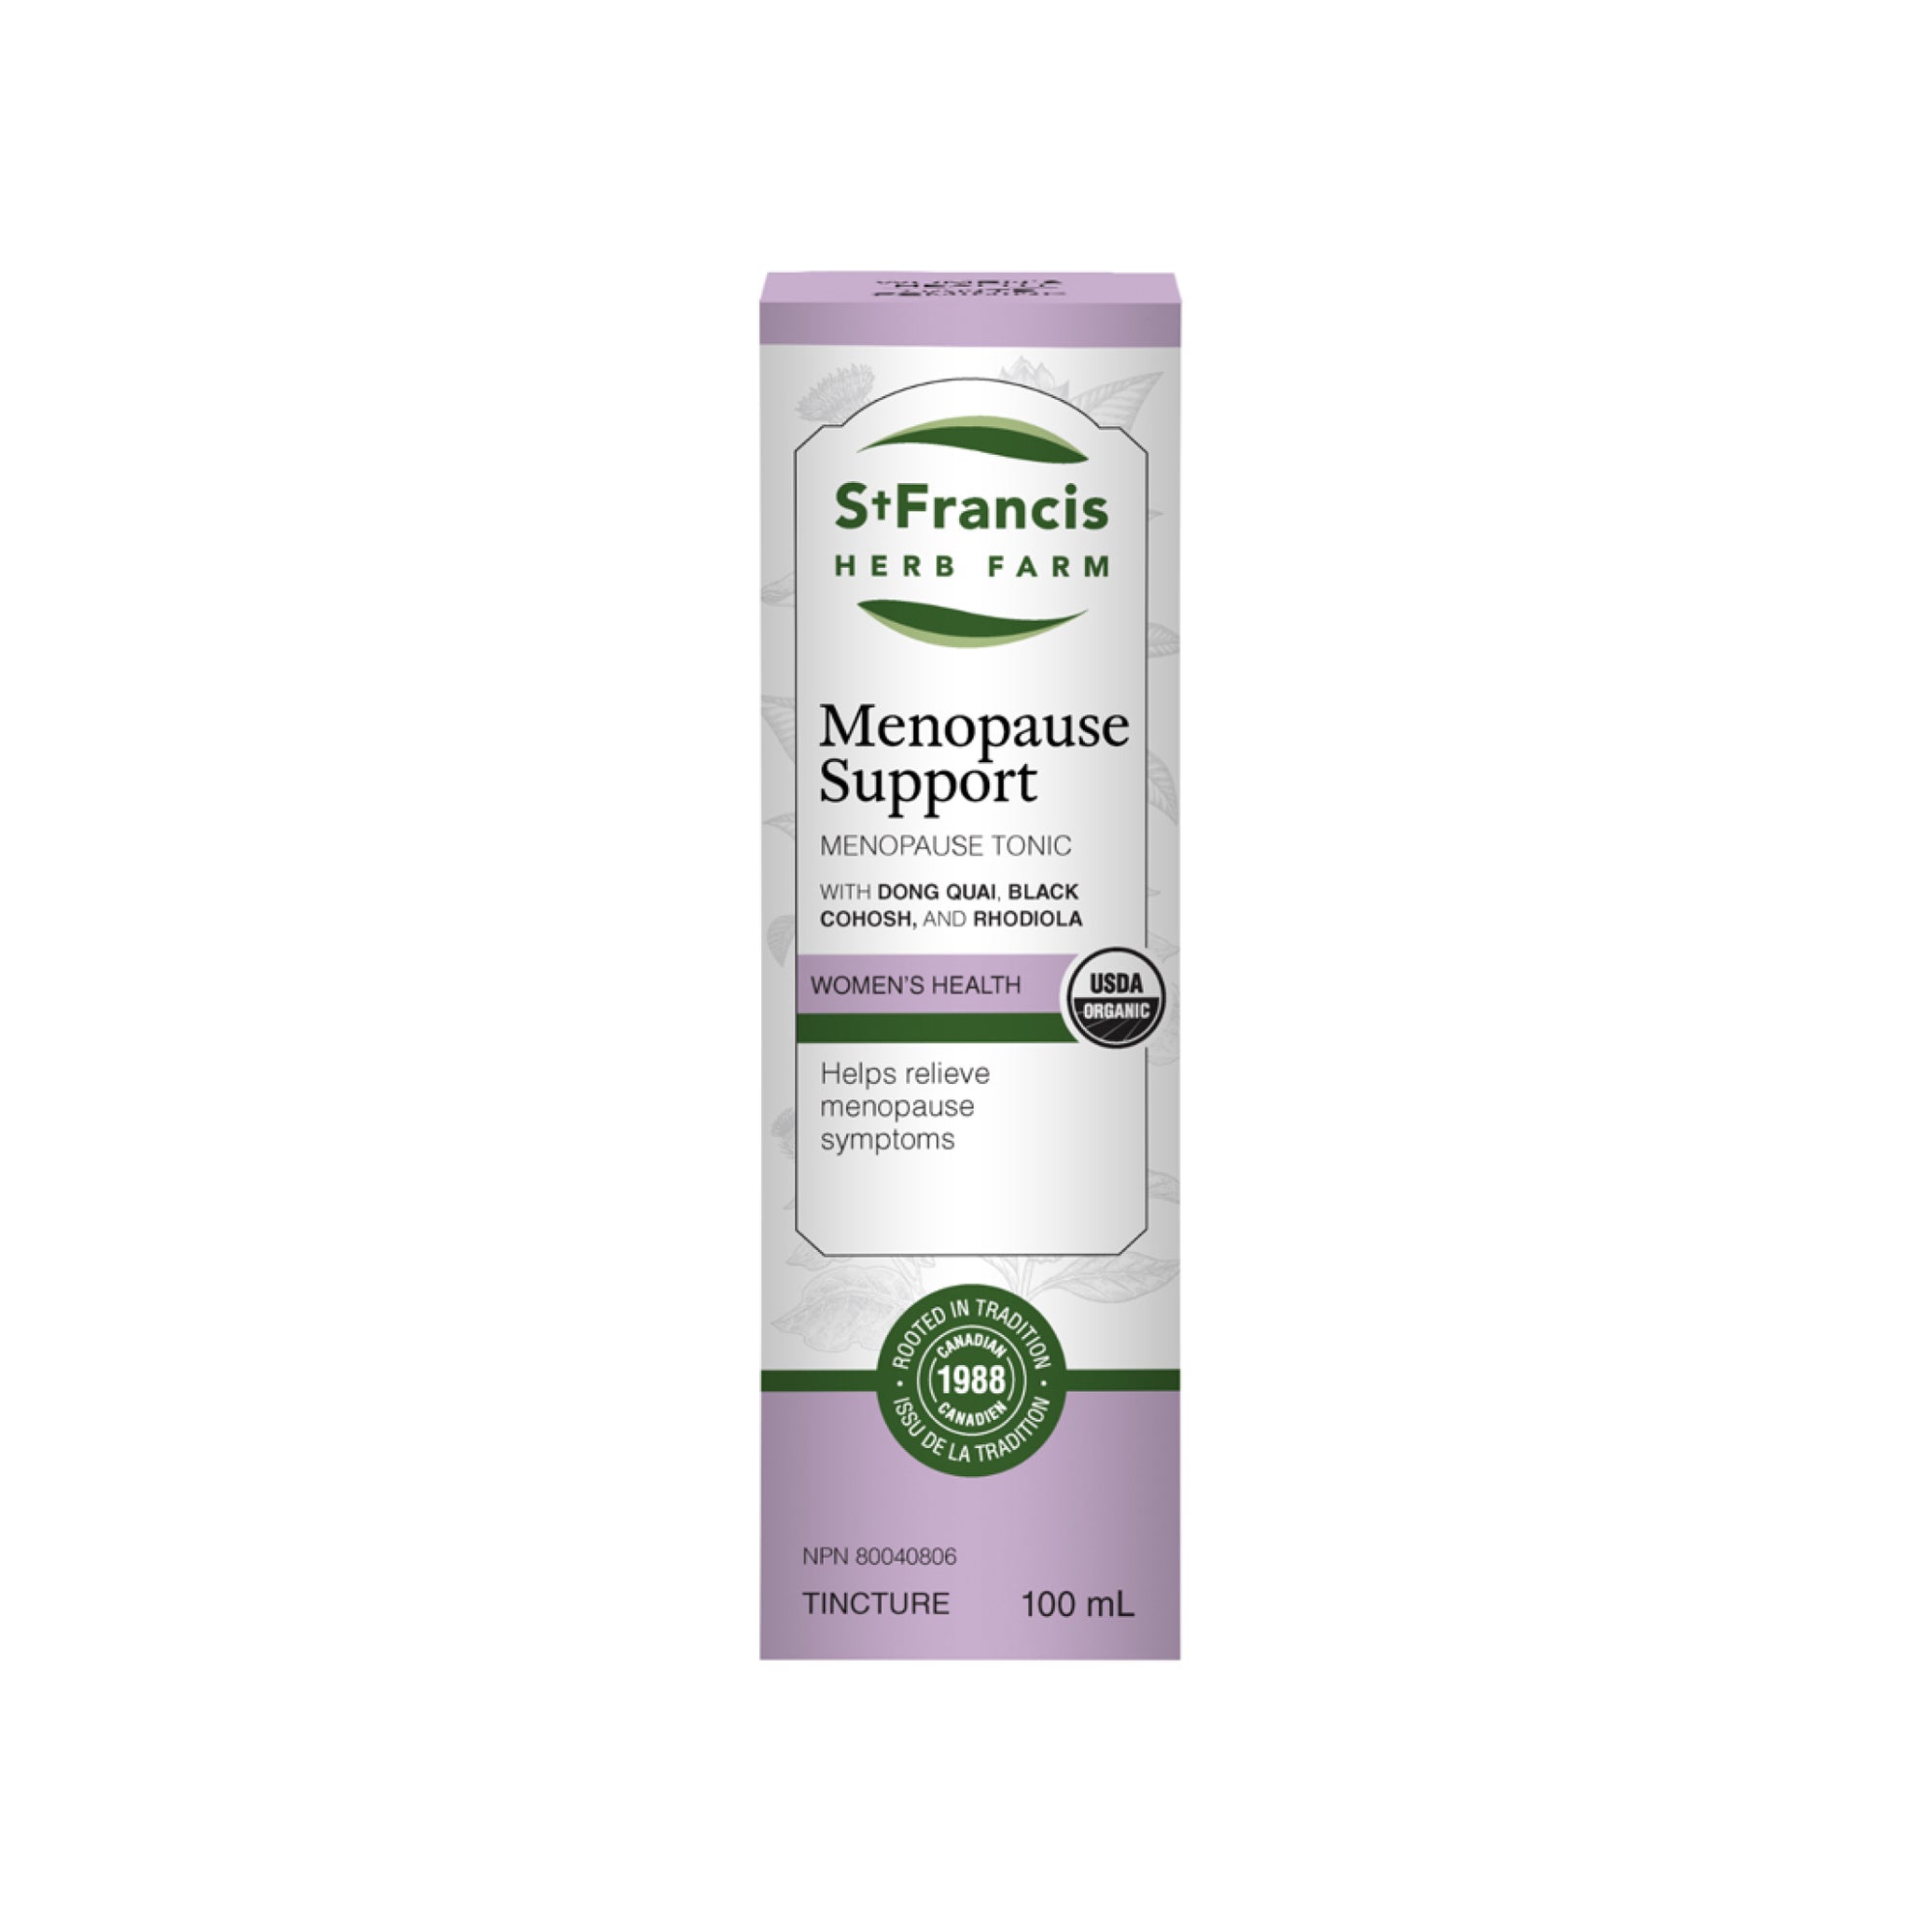 St. Francis Menopause Support 100ml